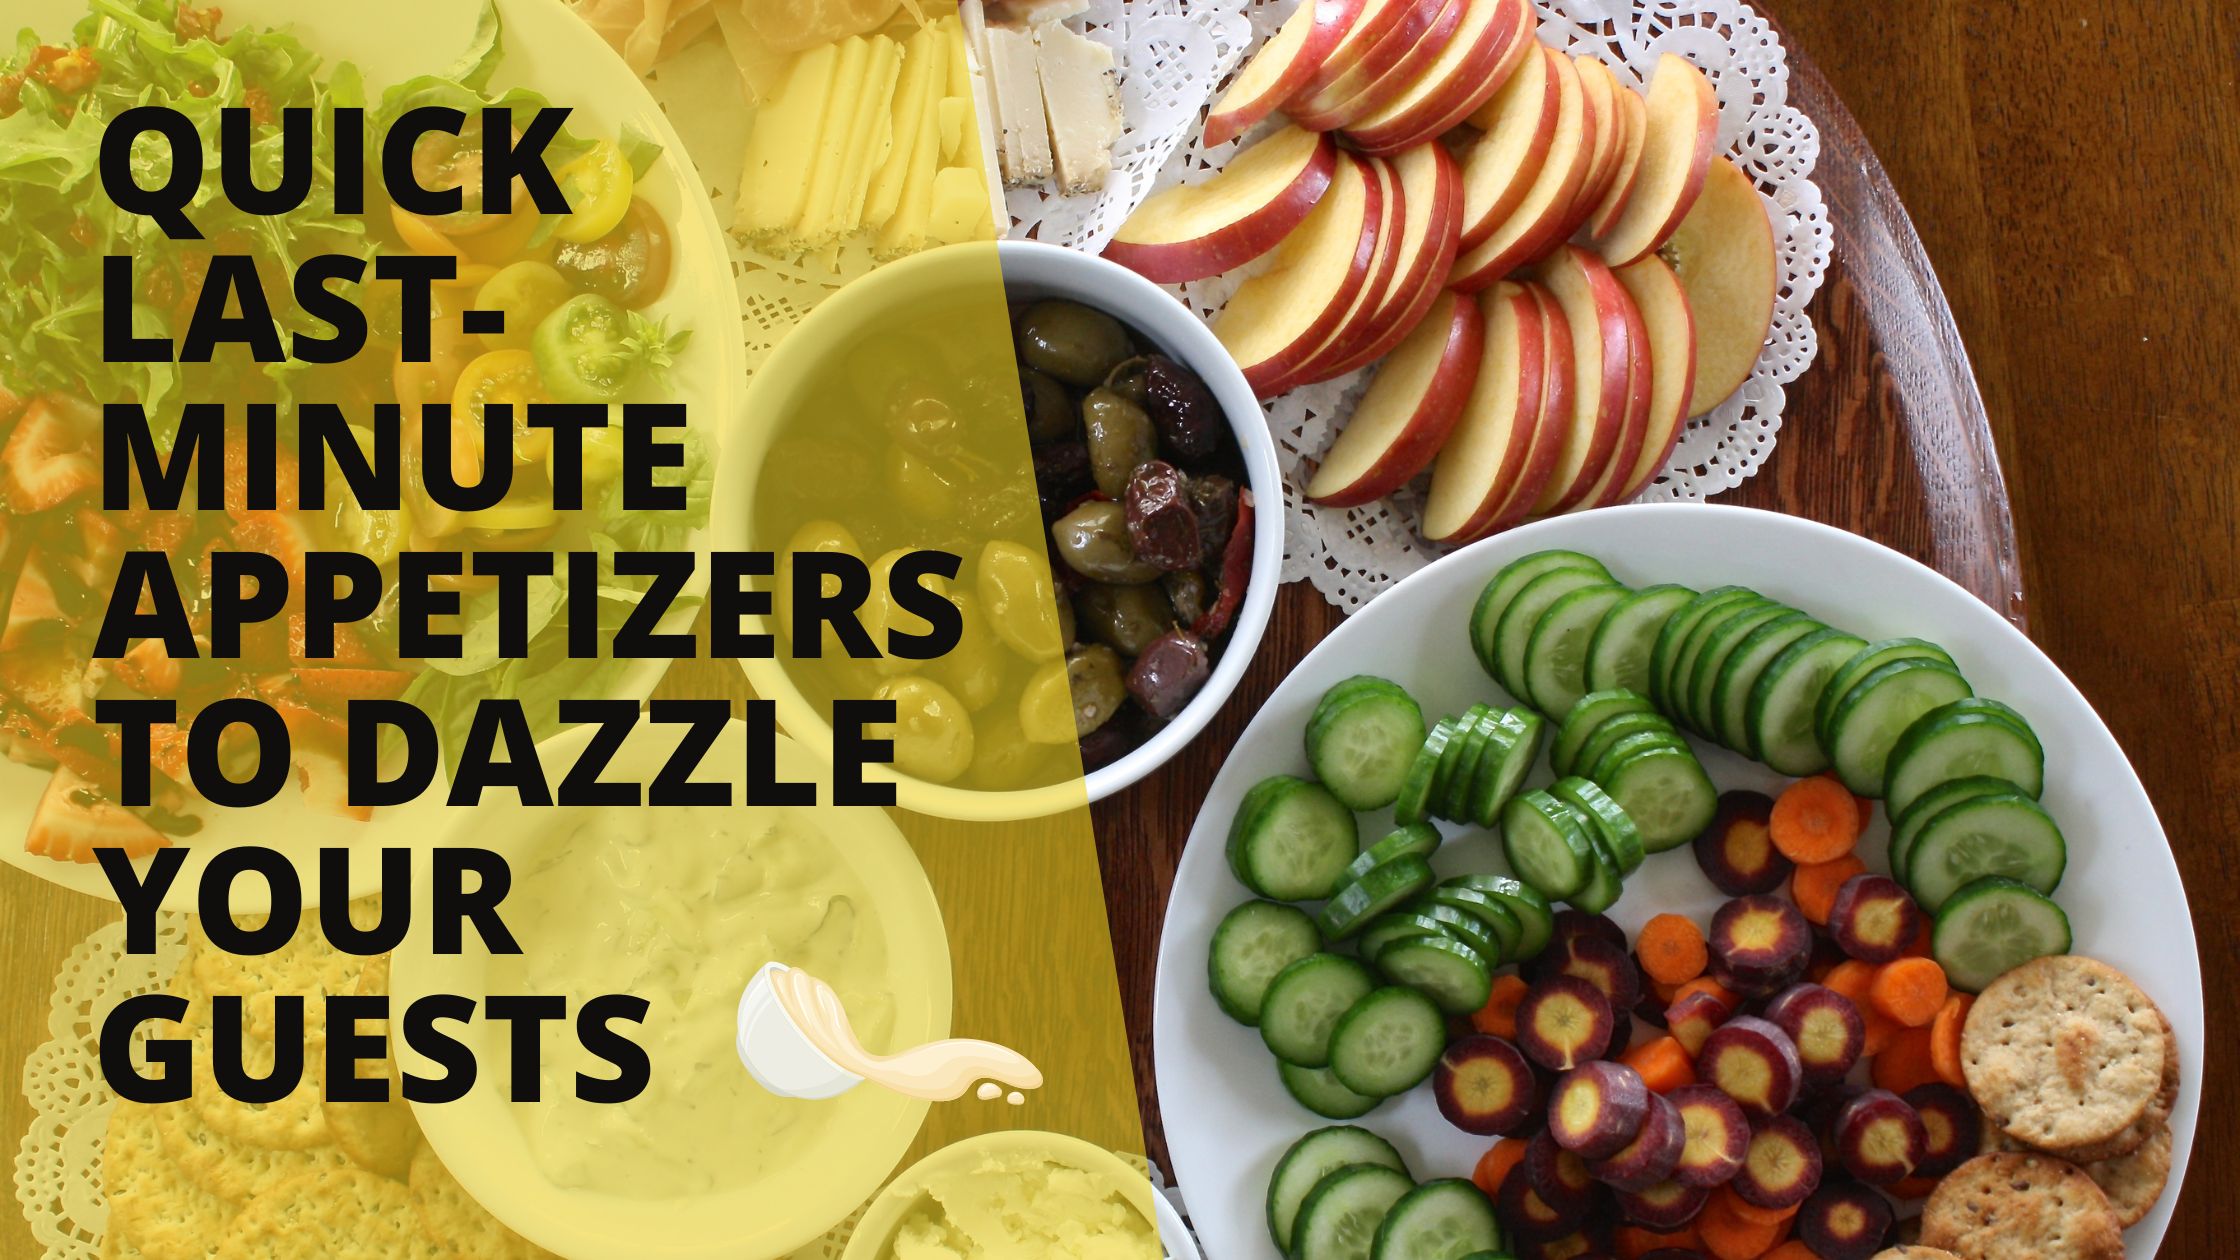 Quick last-minute appetizers to dazzle your guests